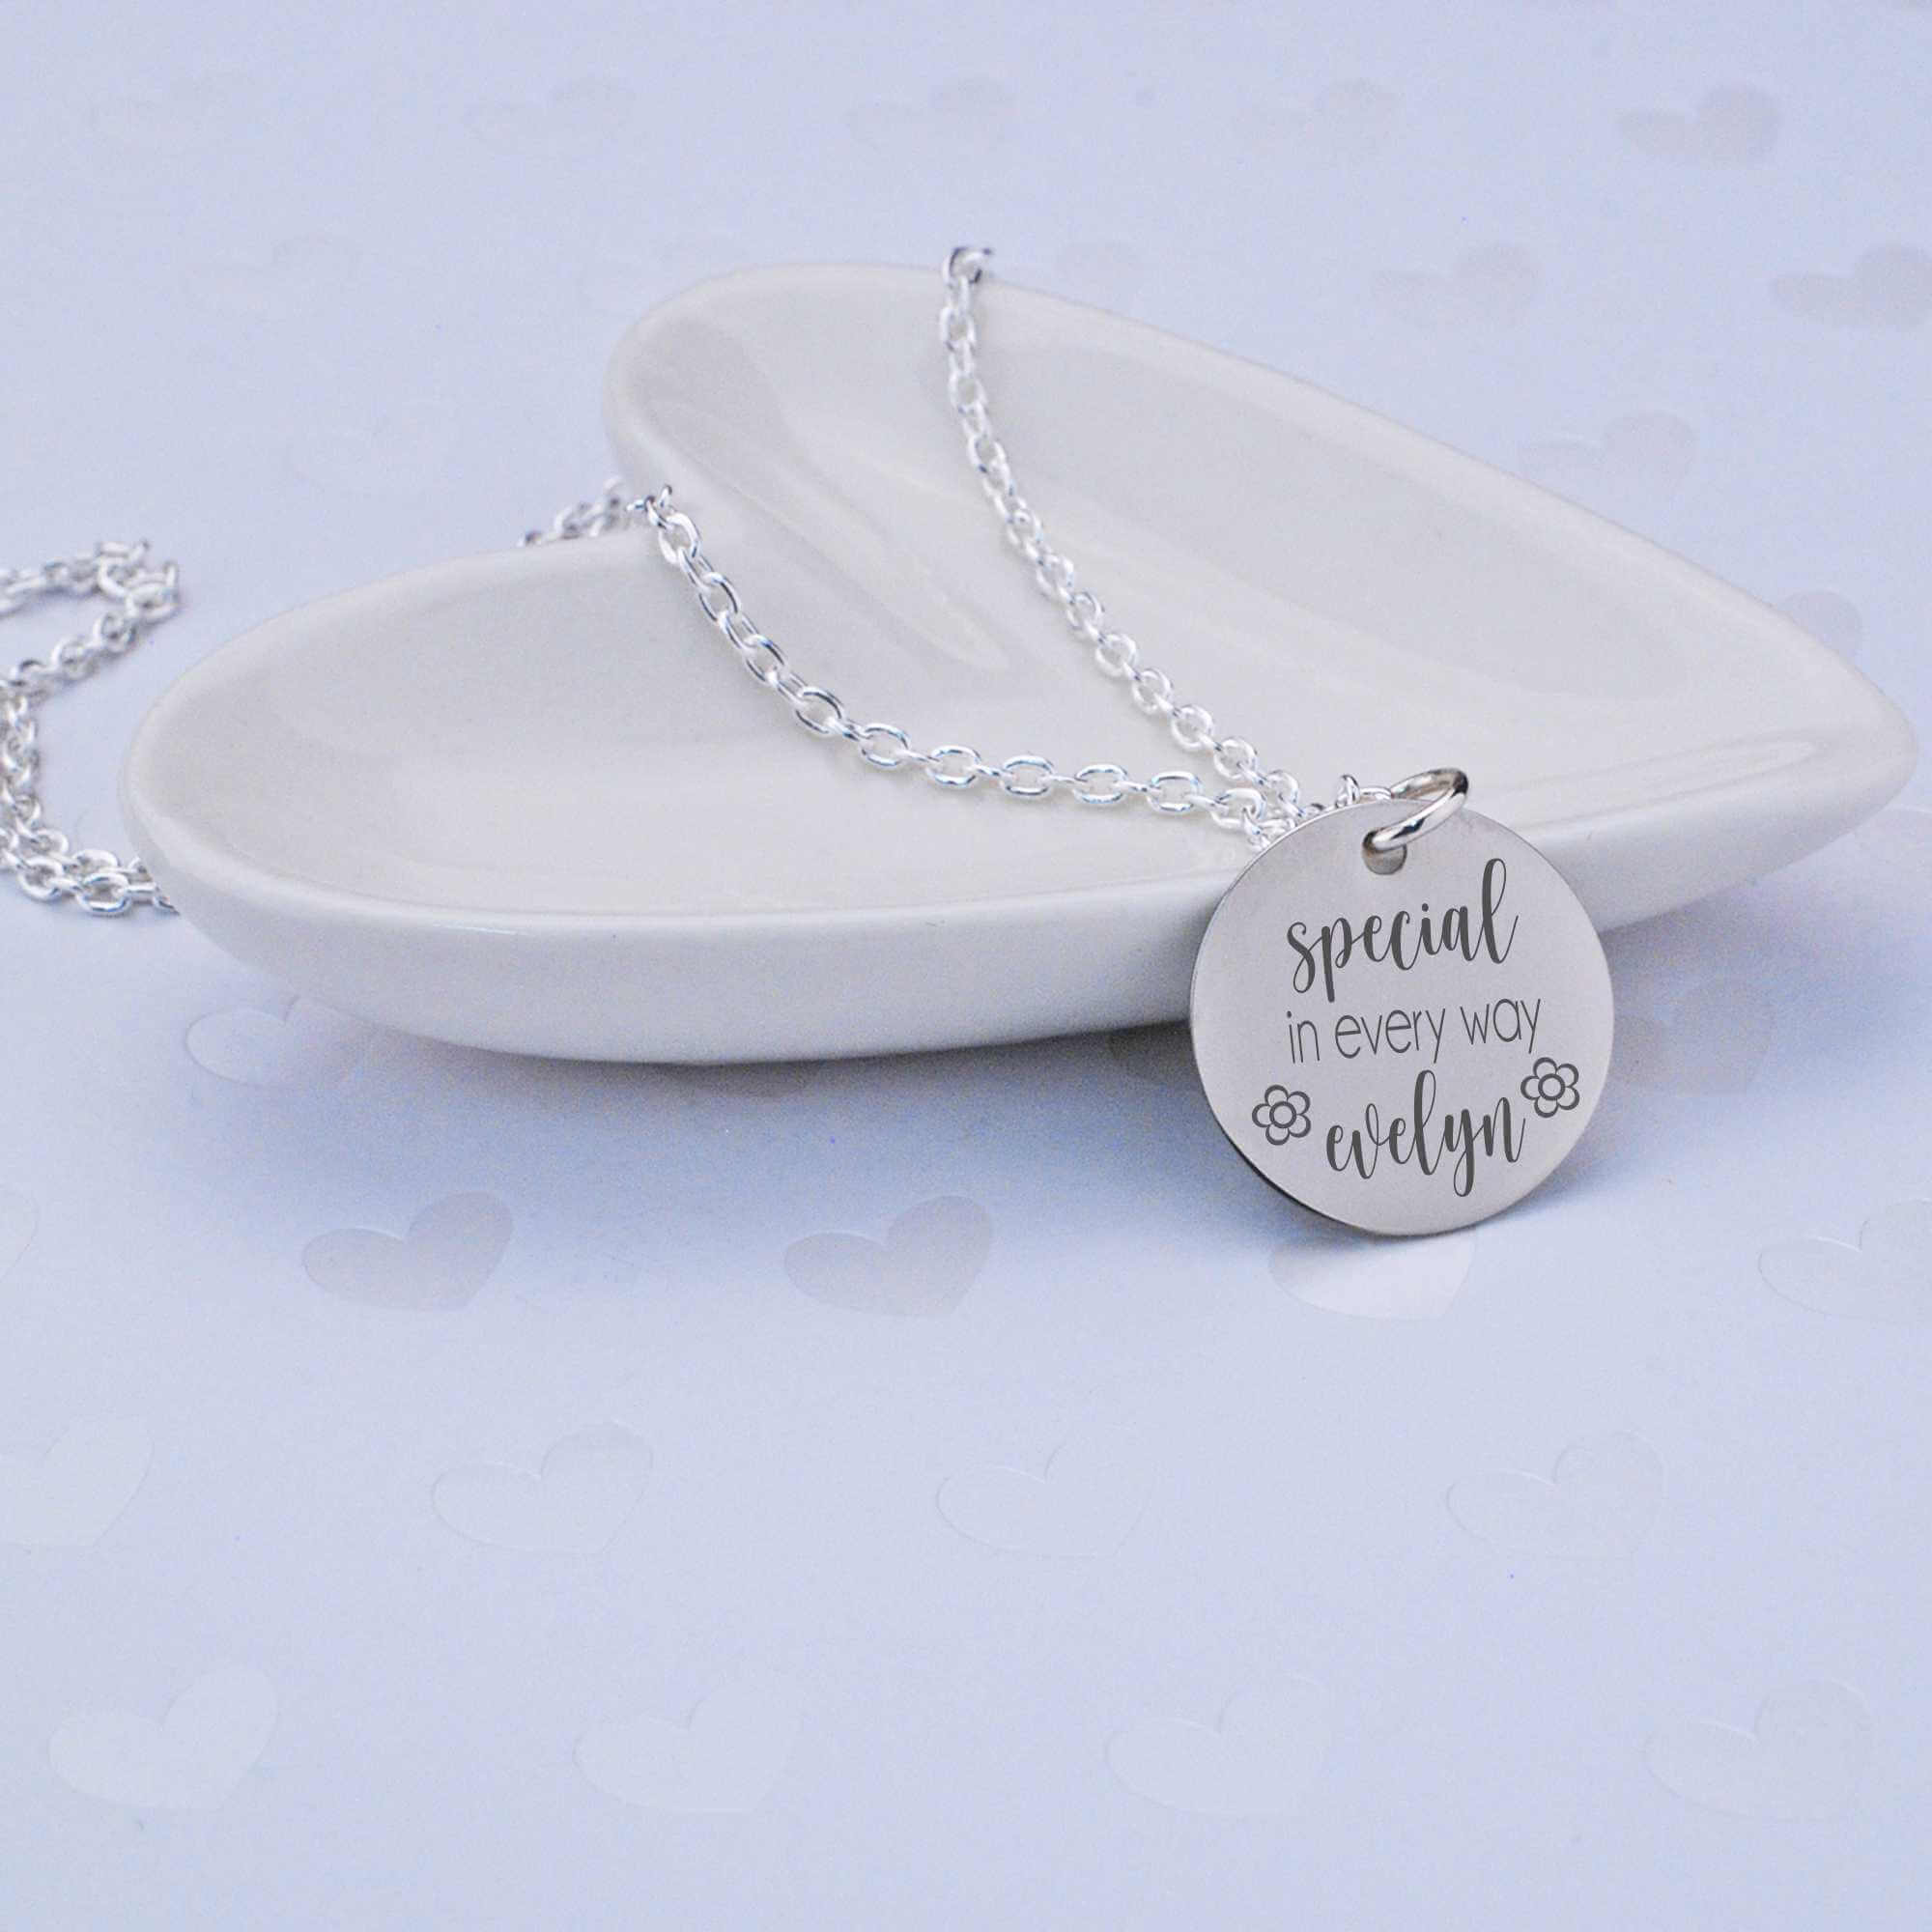 Bridesmaid Necklace With Personalized Display Card